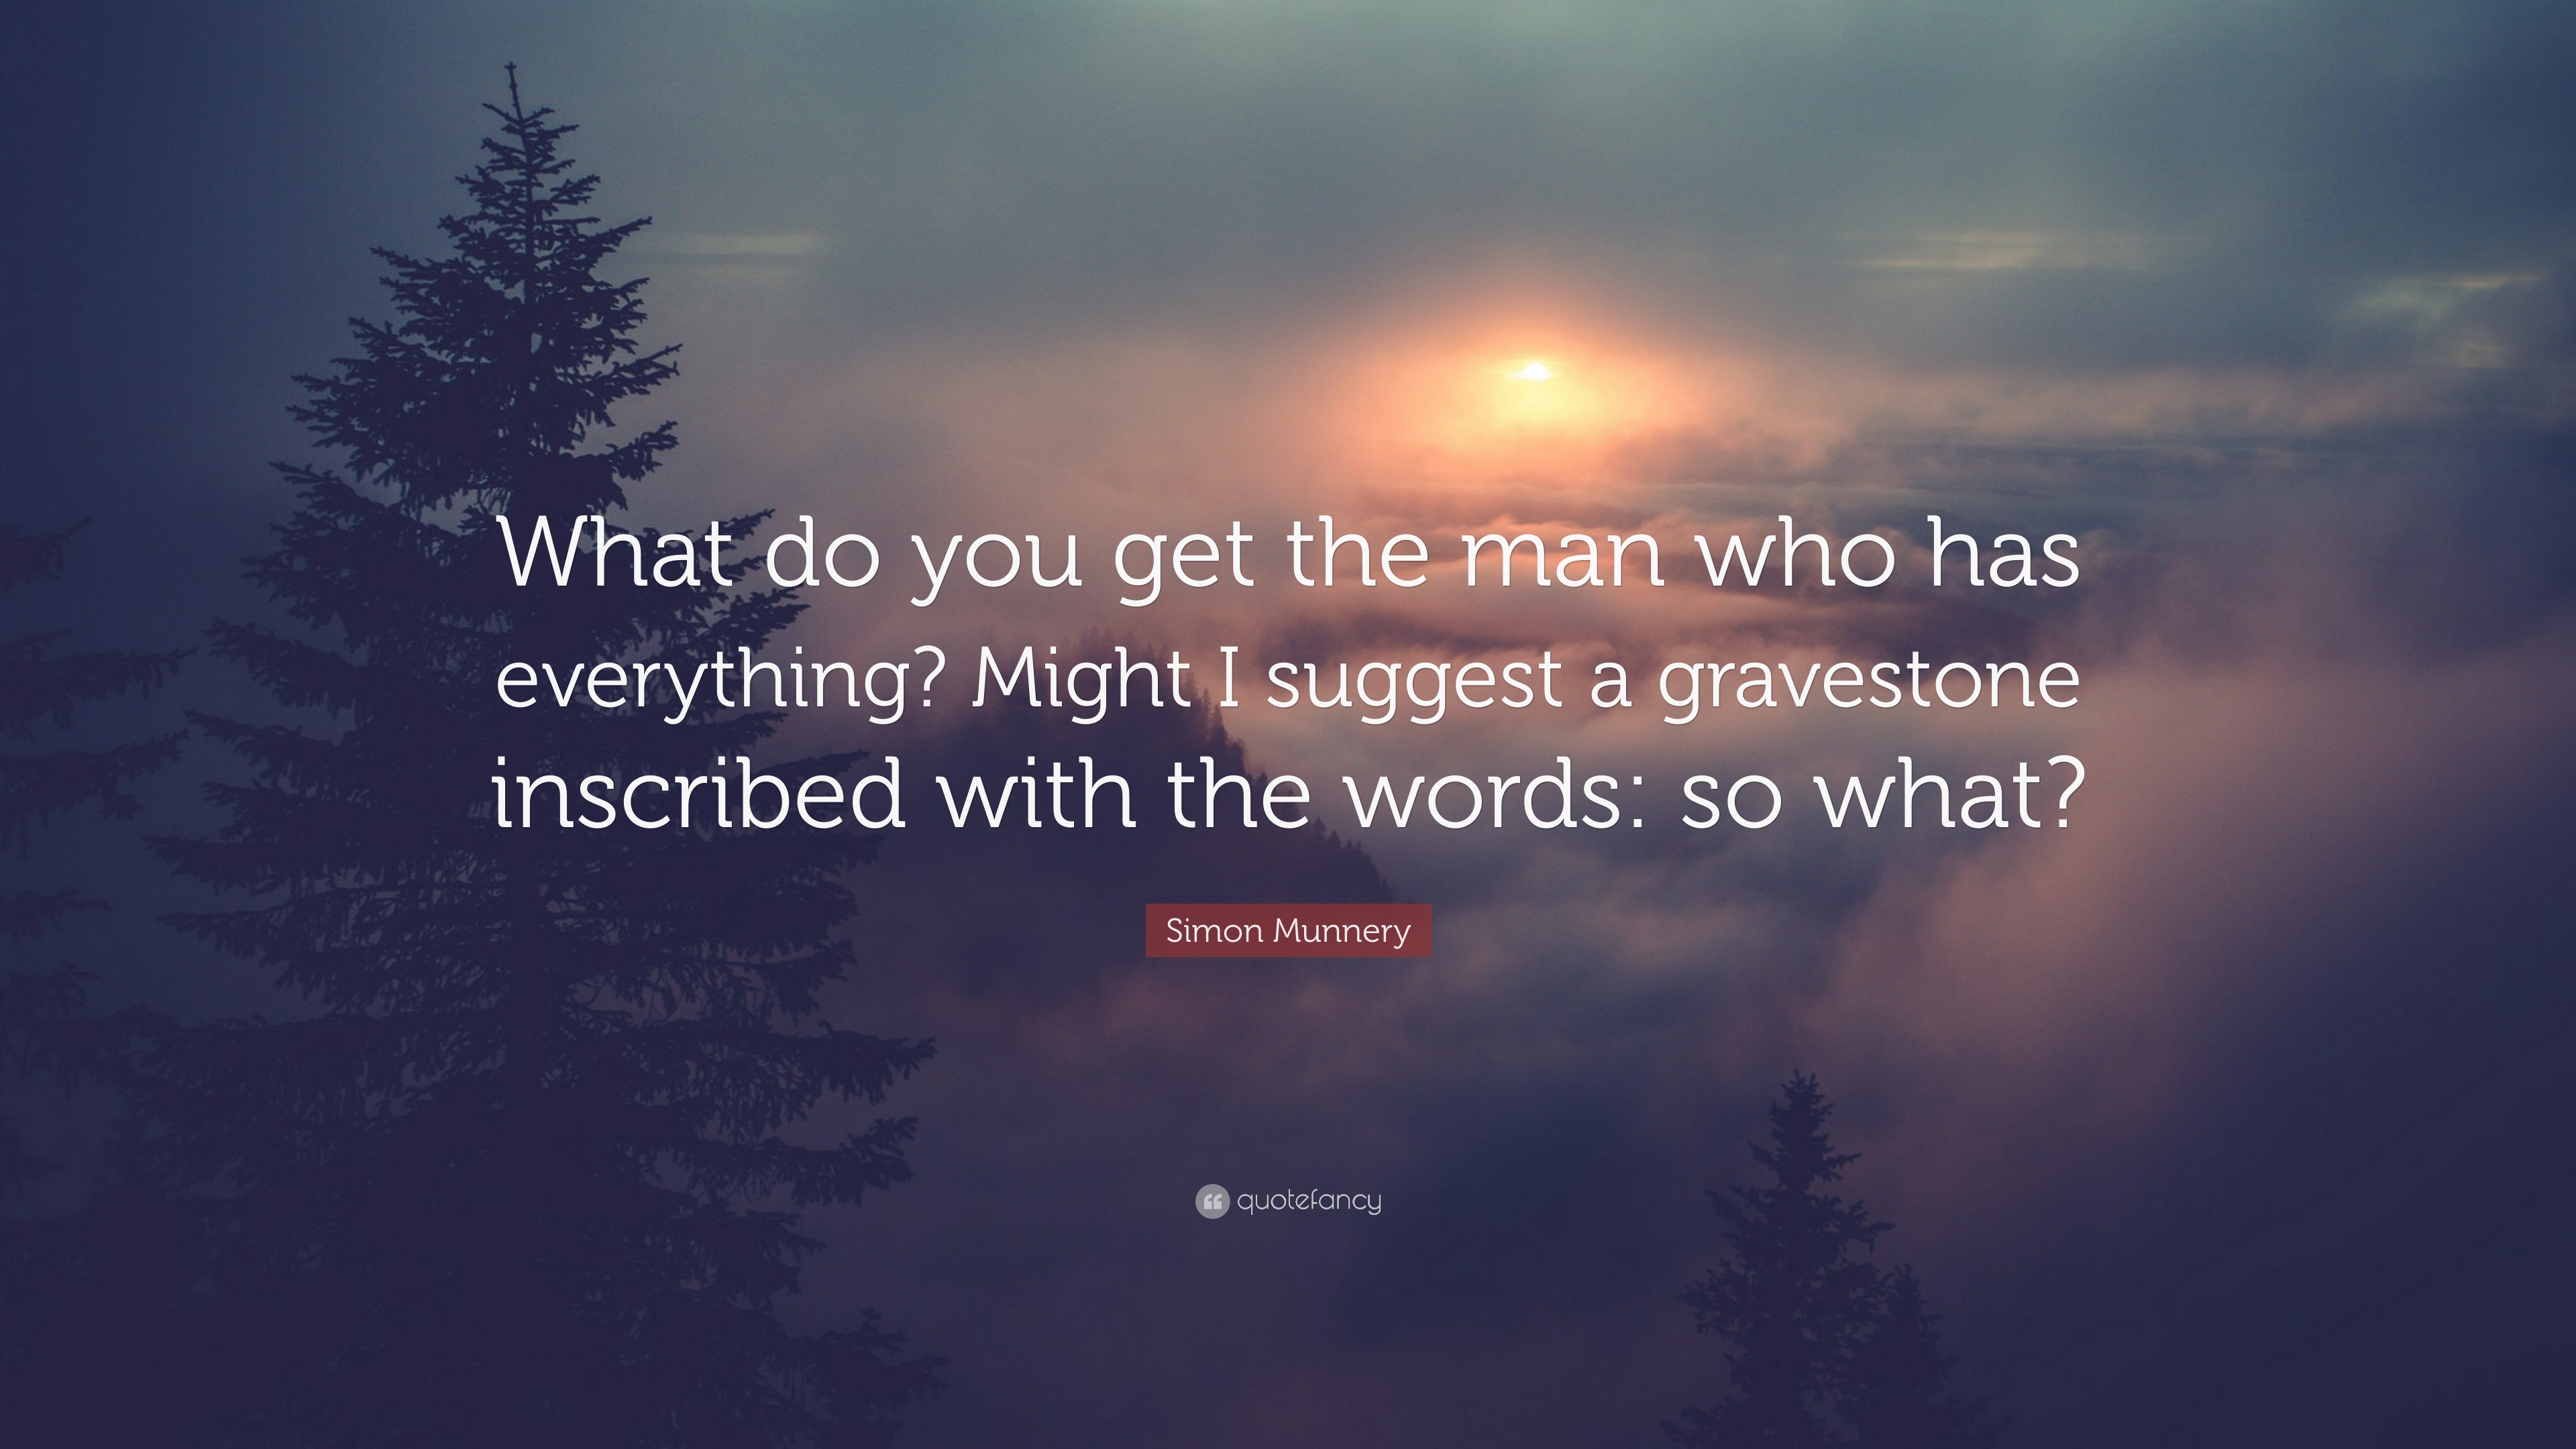 Simon Munnery Quote: "What do you get the man who has ...